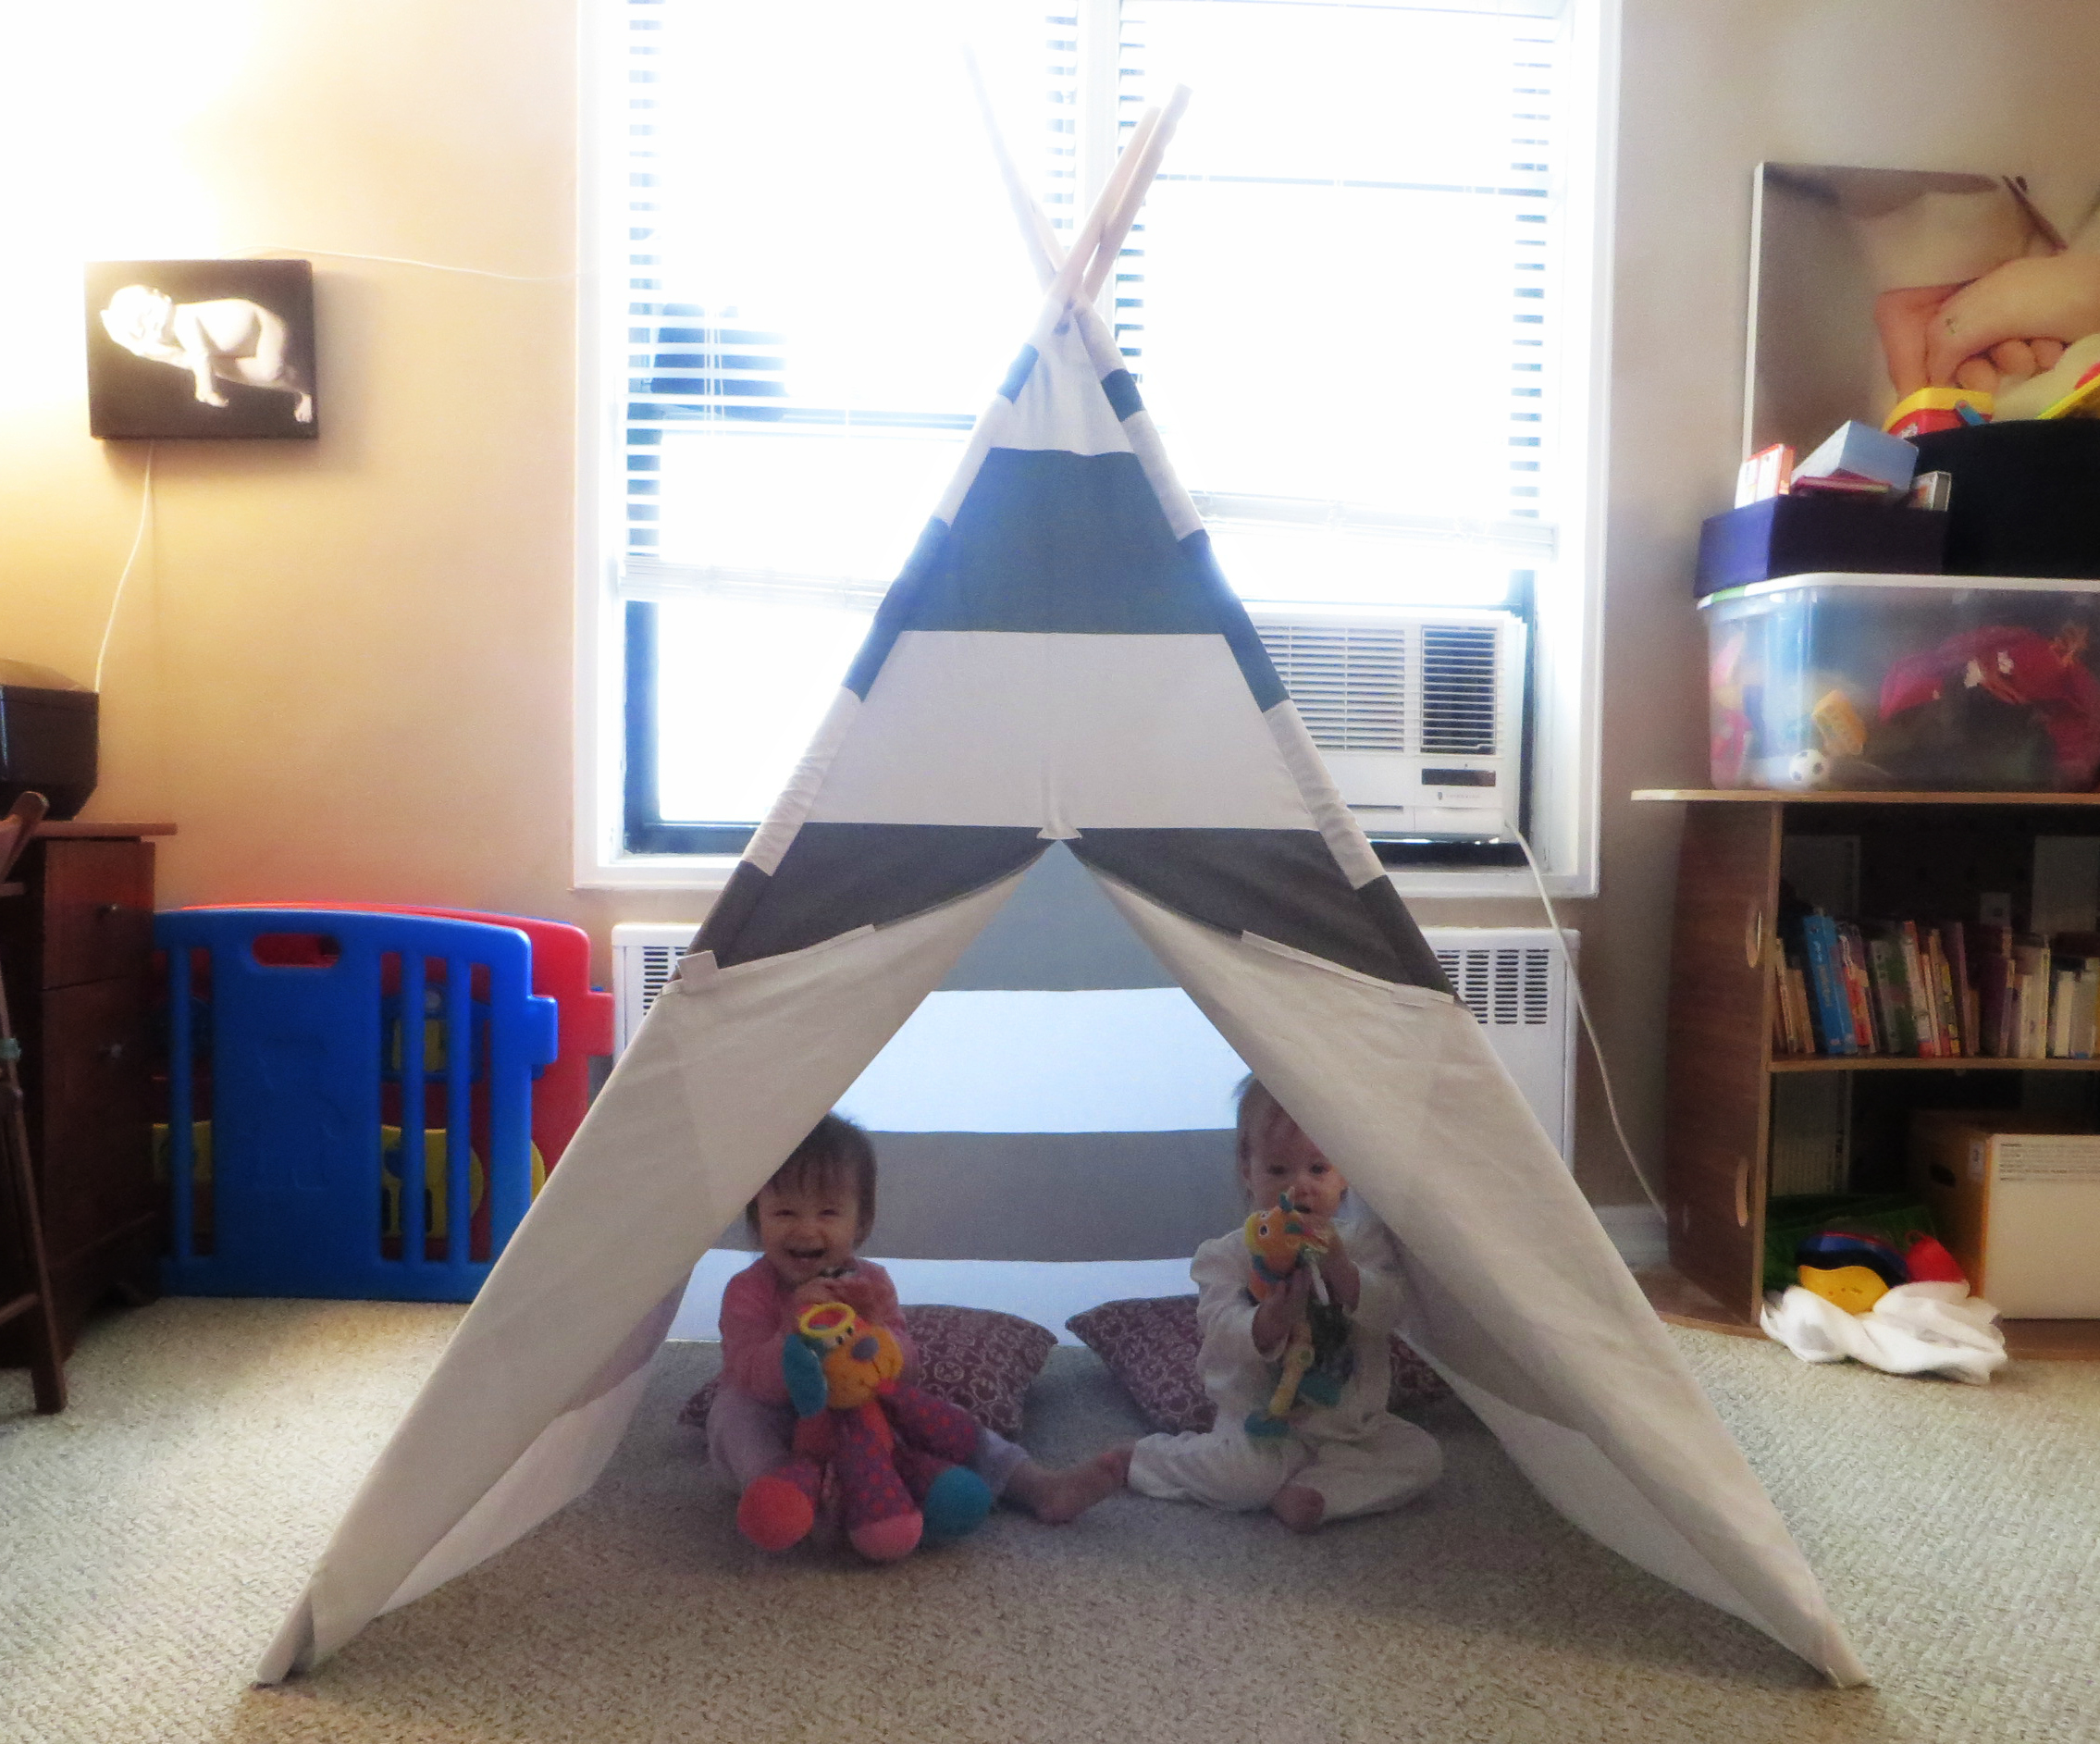 US Japan Fam reviews and loves Tiny Hideaways Teepee Tent